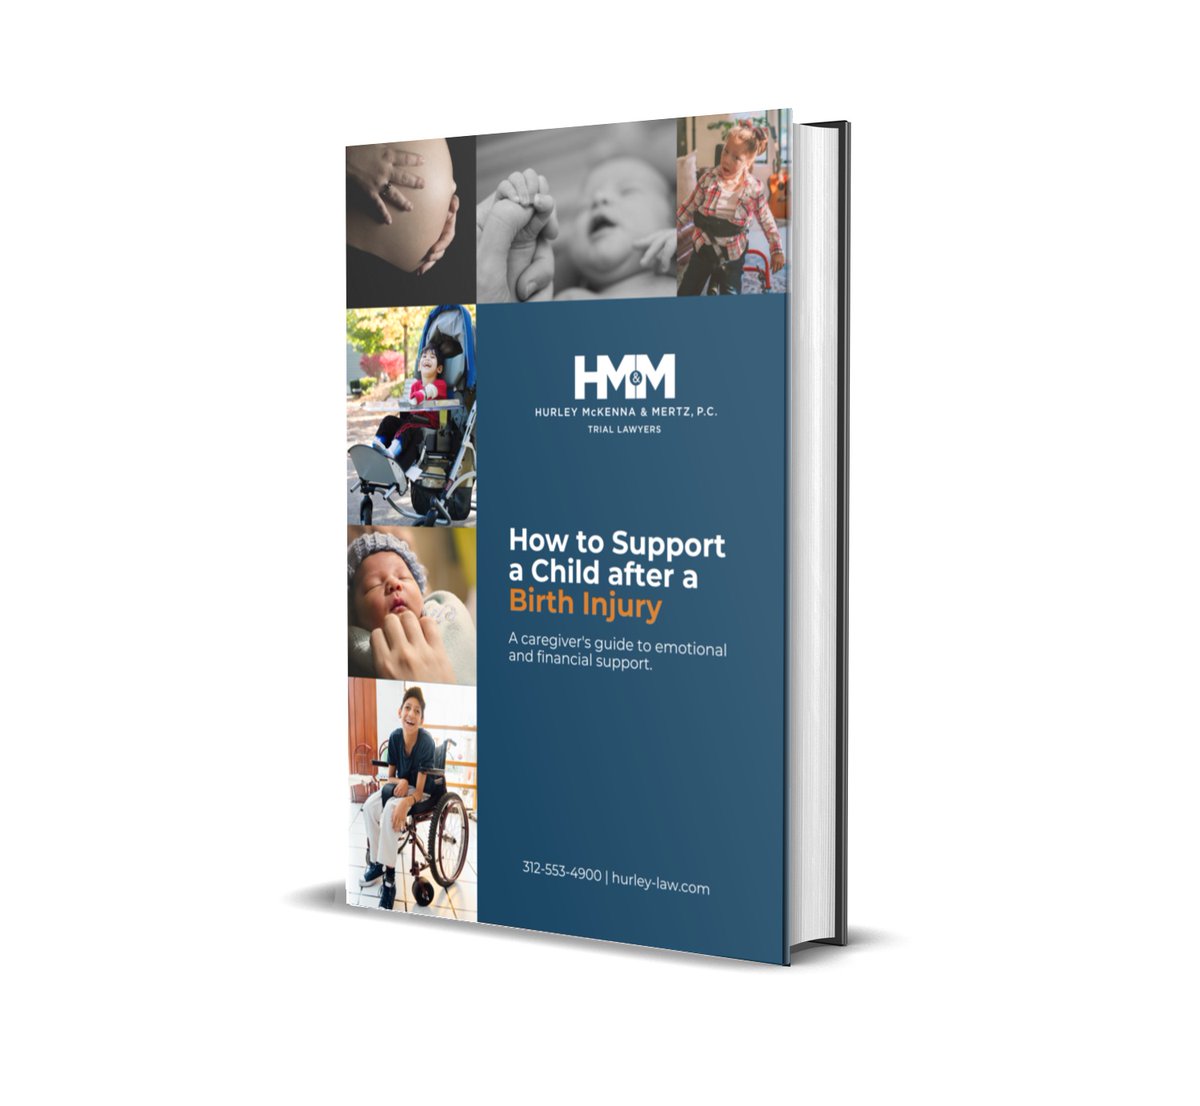 Has your child suffered a serious and permanent birth injury? Download our free birth injury ebook for actionable resources and more information as you care for your child. hurley-law-6845264.hs-sites.com/en/how-to-supp… #BirthInjury #FreeResource